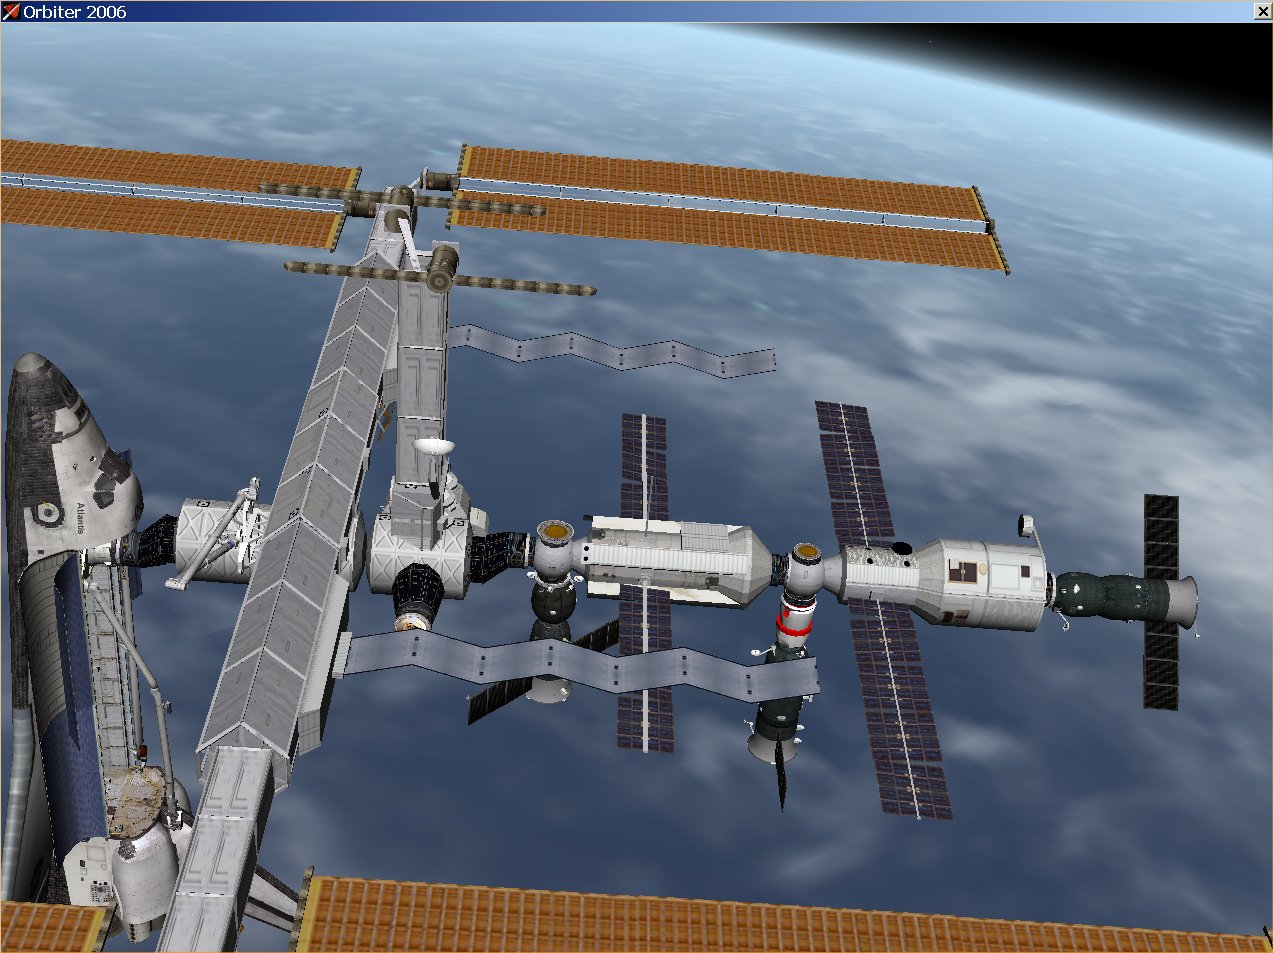 [STS-117+with+ISS+in+Orbiter.jpg]